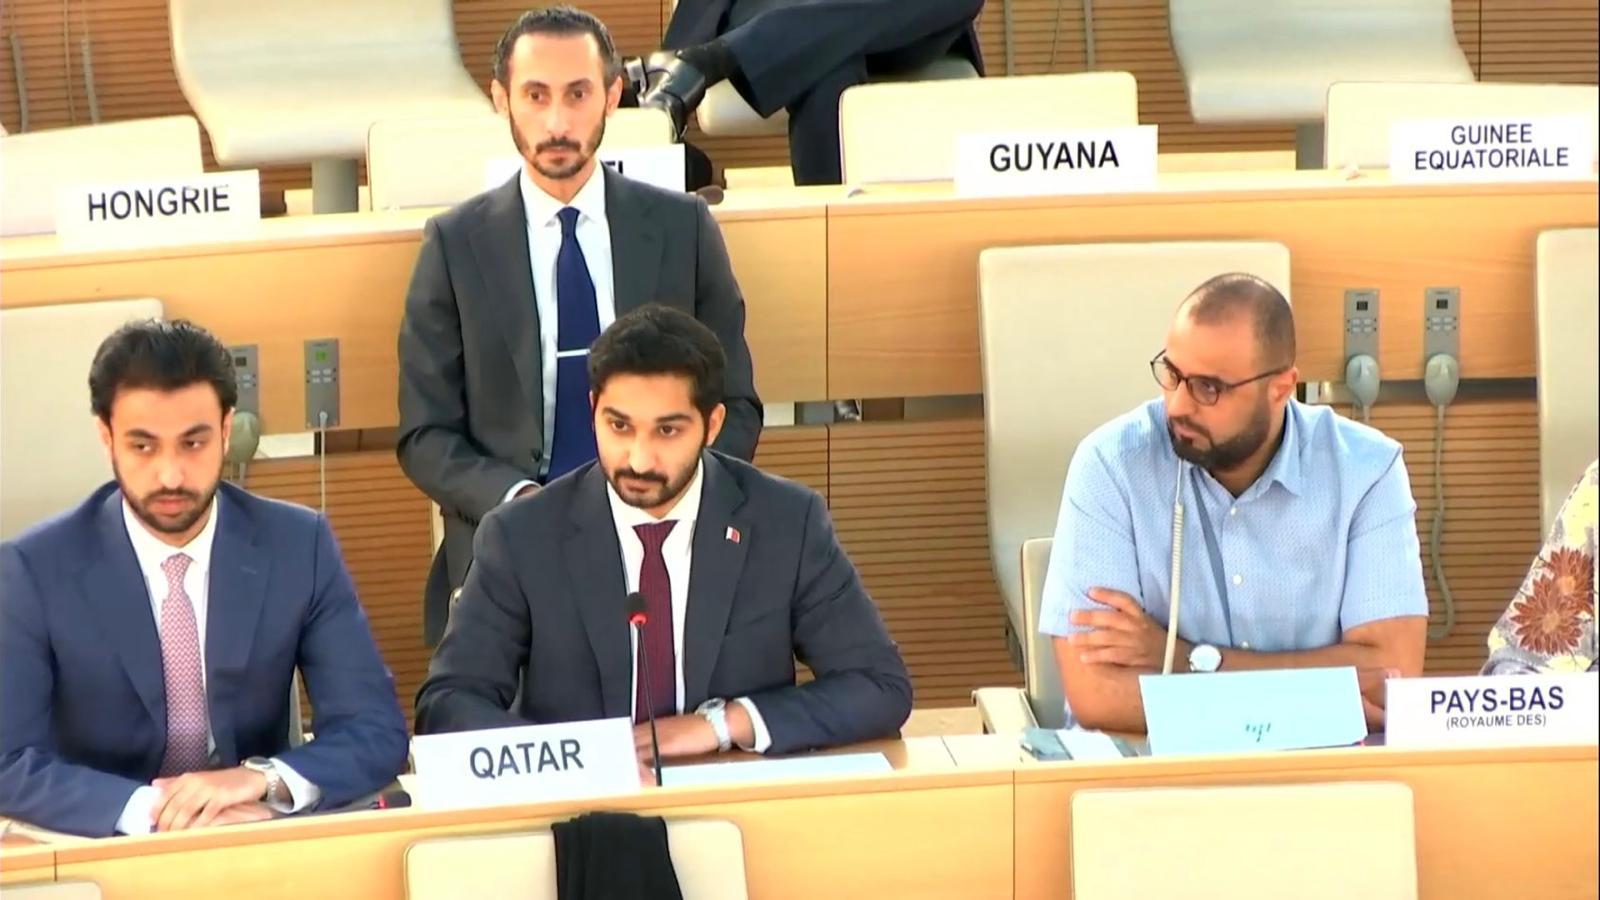 Qatar calls on the Libyan parties to avoid escalation and create appropriate conditions for holding elections in the country.